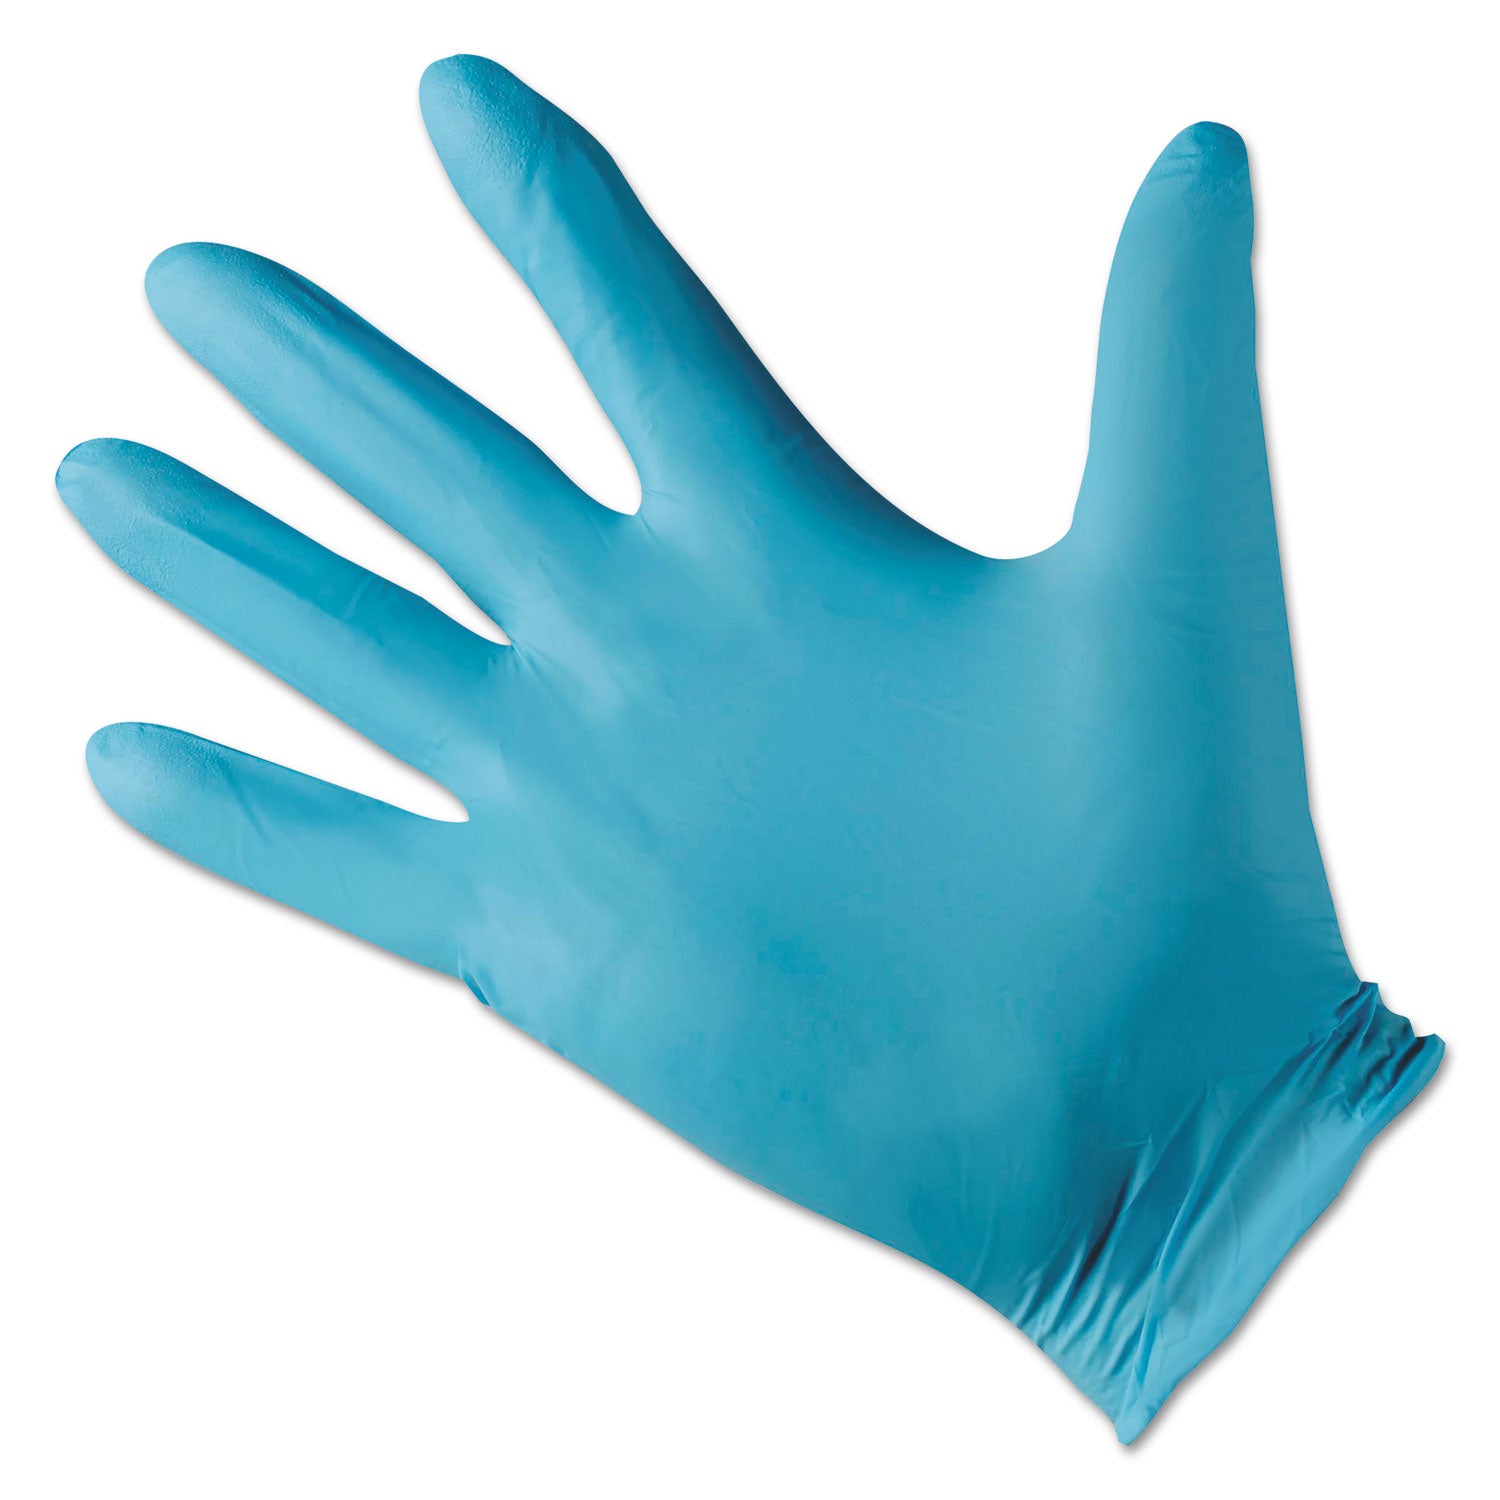 g10-blue-nitrile-gloves-blue-242-mm-length-small-size-7-10-carton_kcc57371ct - 1